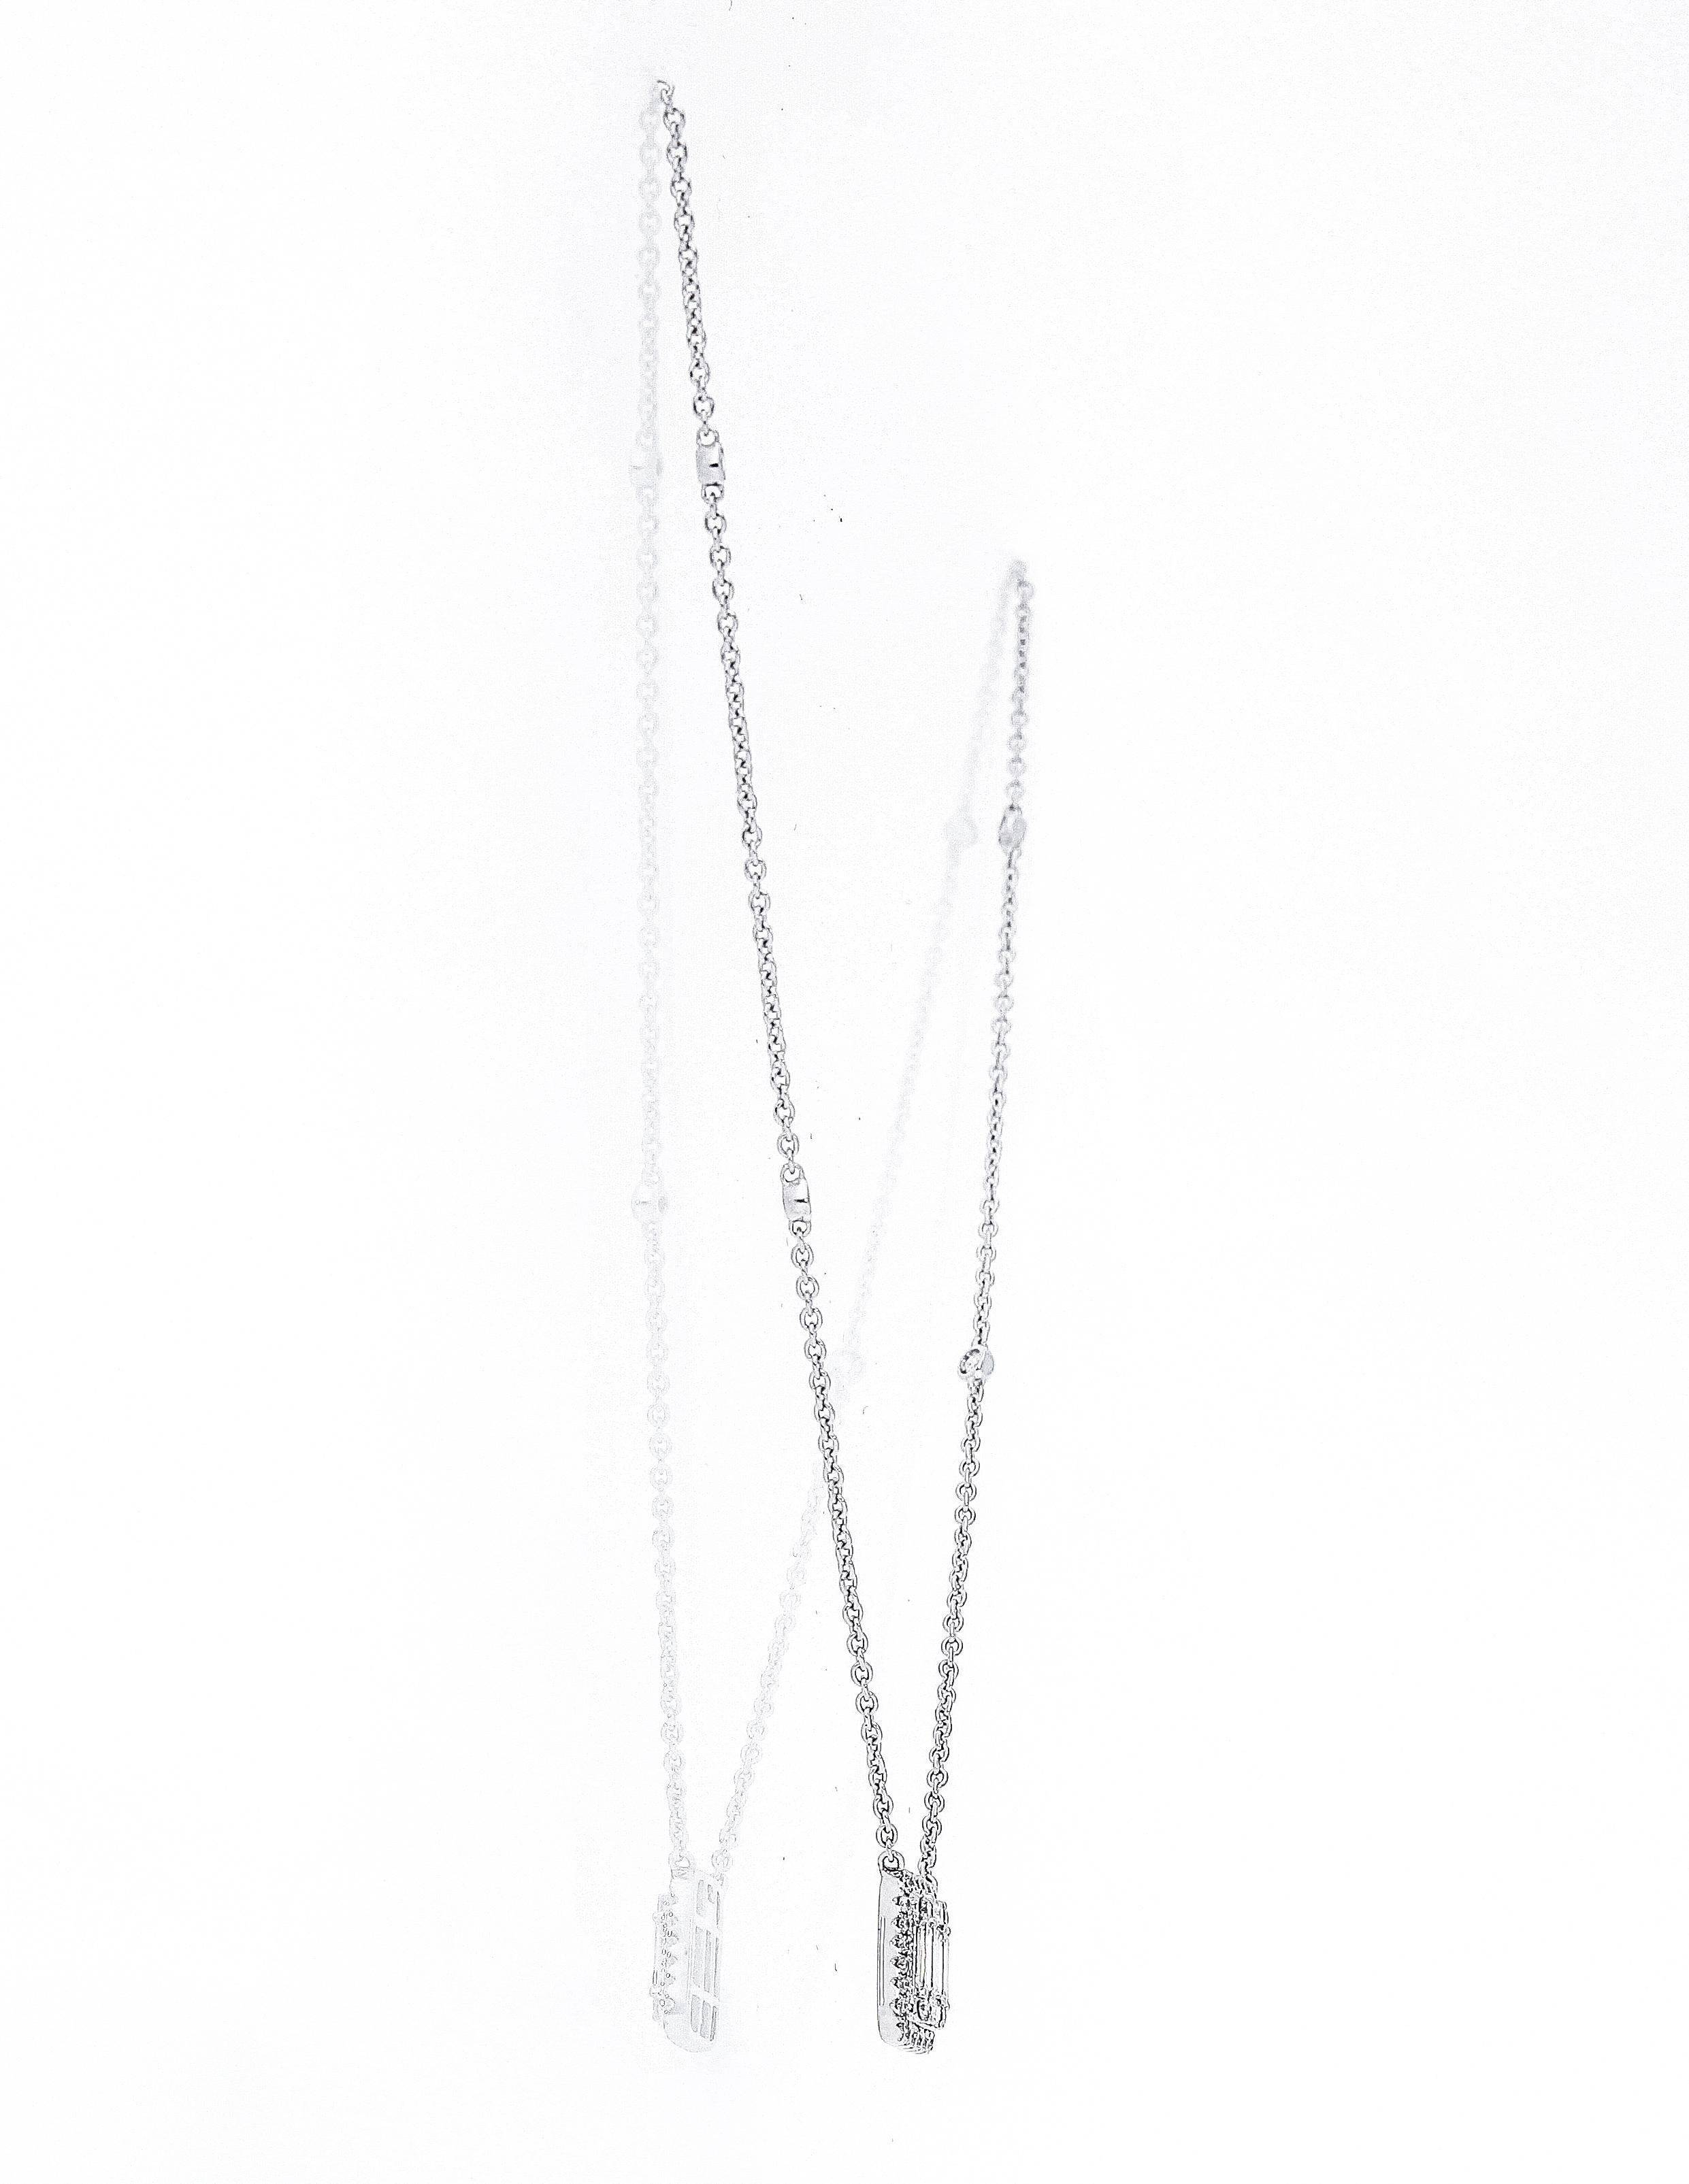 18 Karat White Gold Chain Necklace with Rectangular Diamonds Pendant For Sale 2